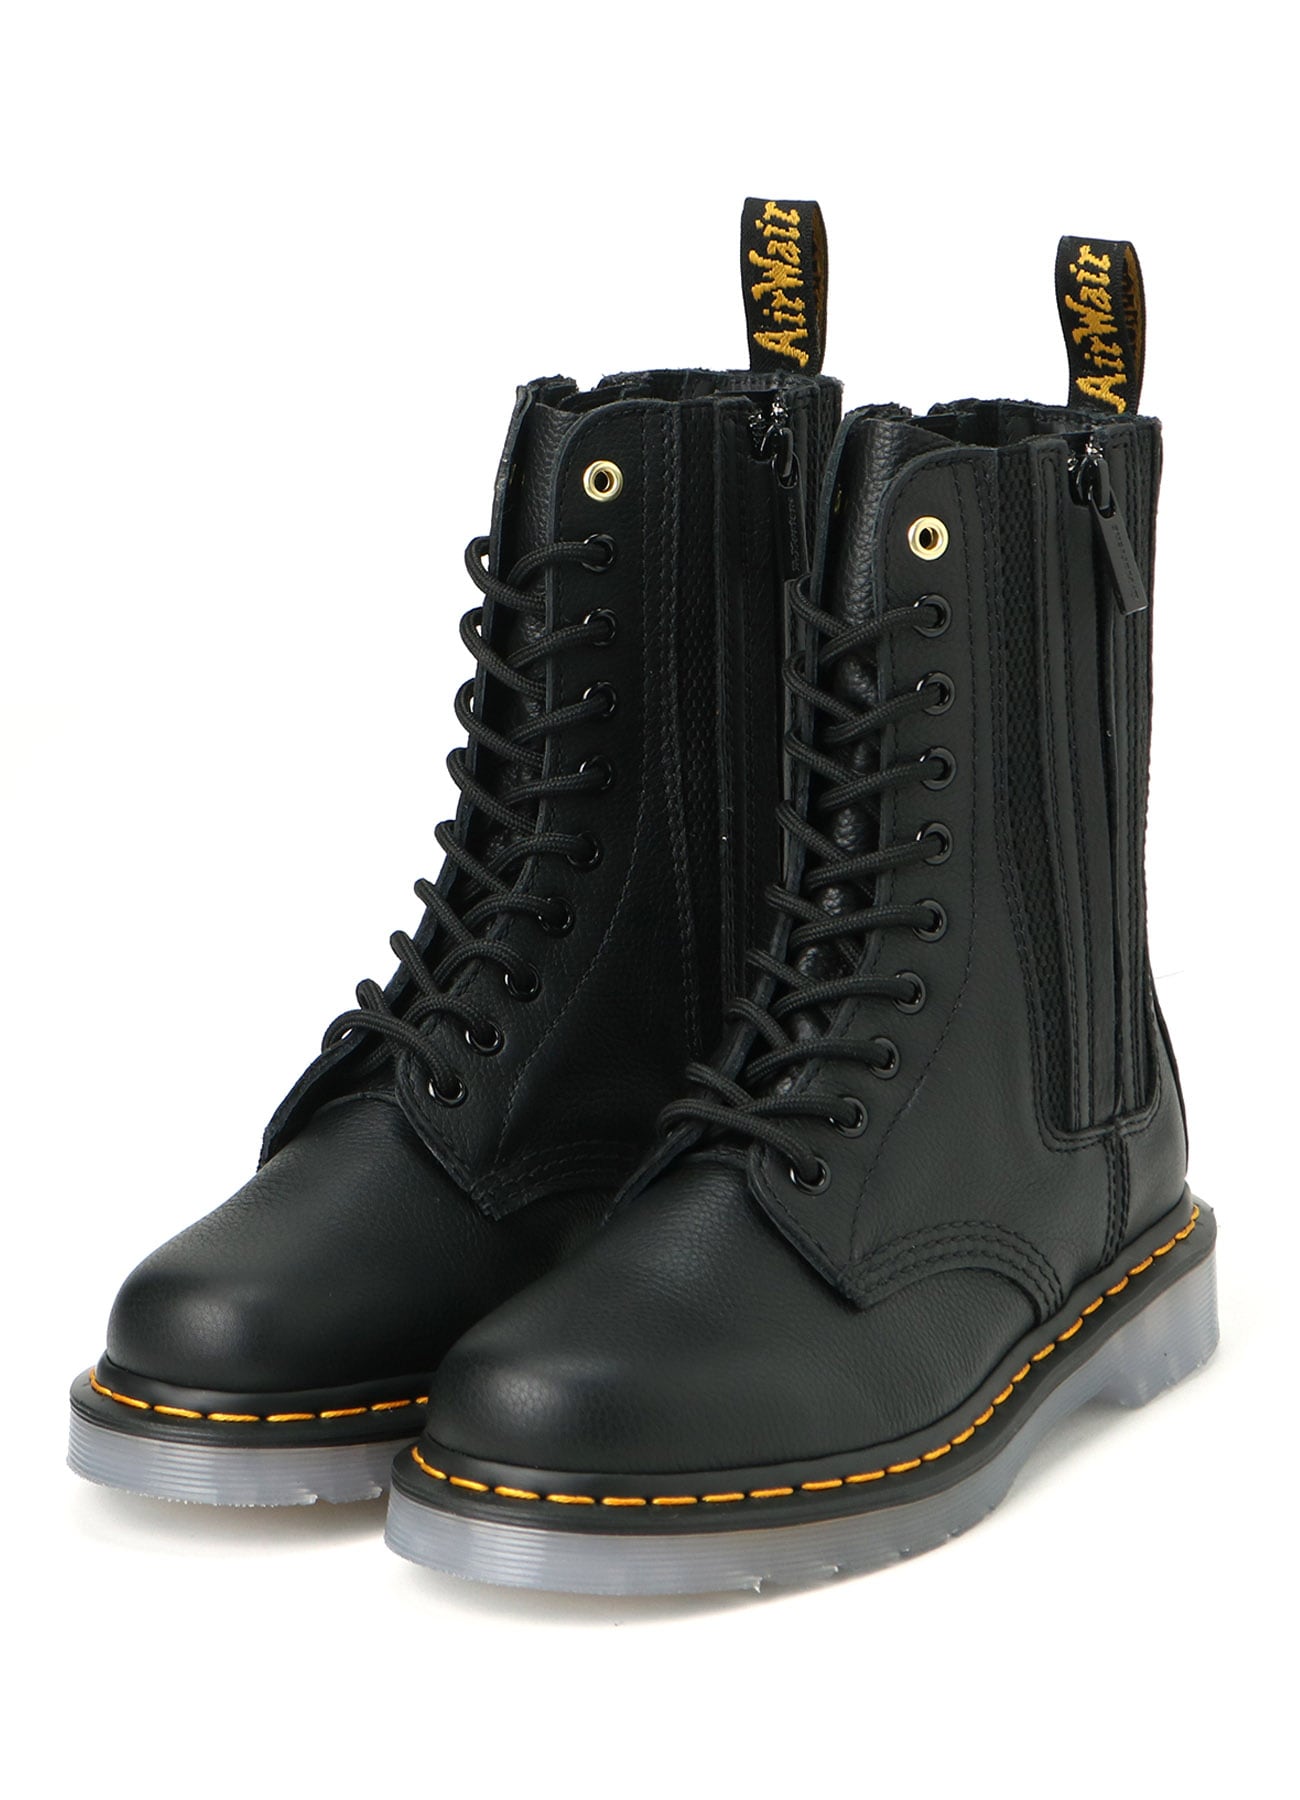 DR MARTENS 10-EYE SIDE GORE BOOTS